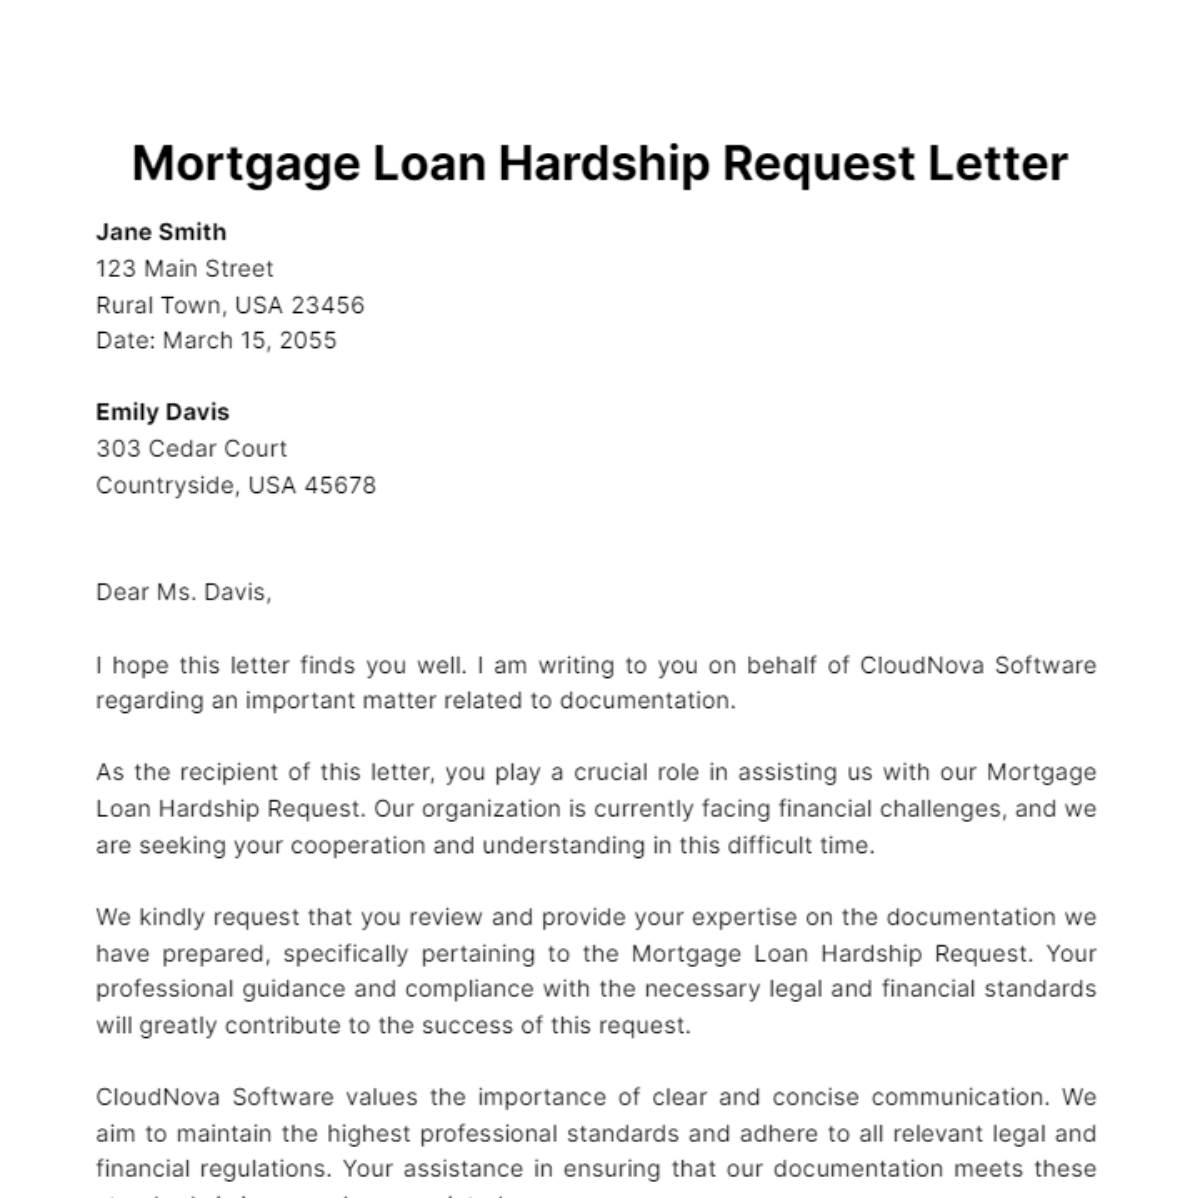 Mortgage Loan Hardship Request Letter Template